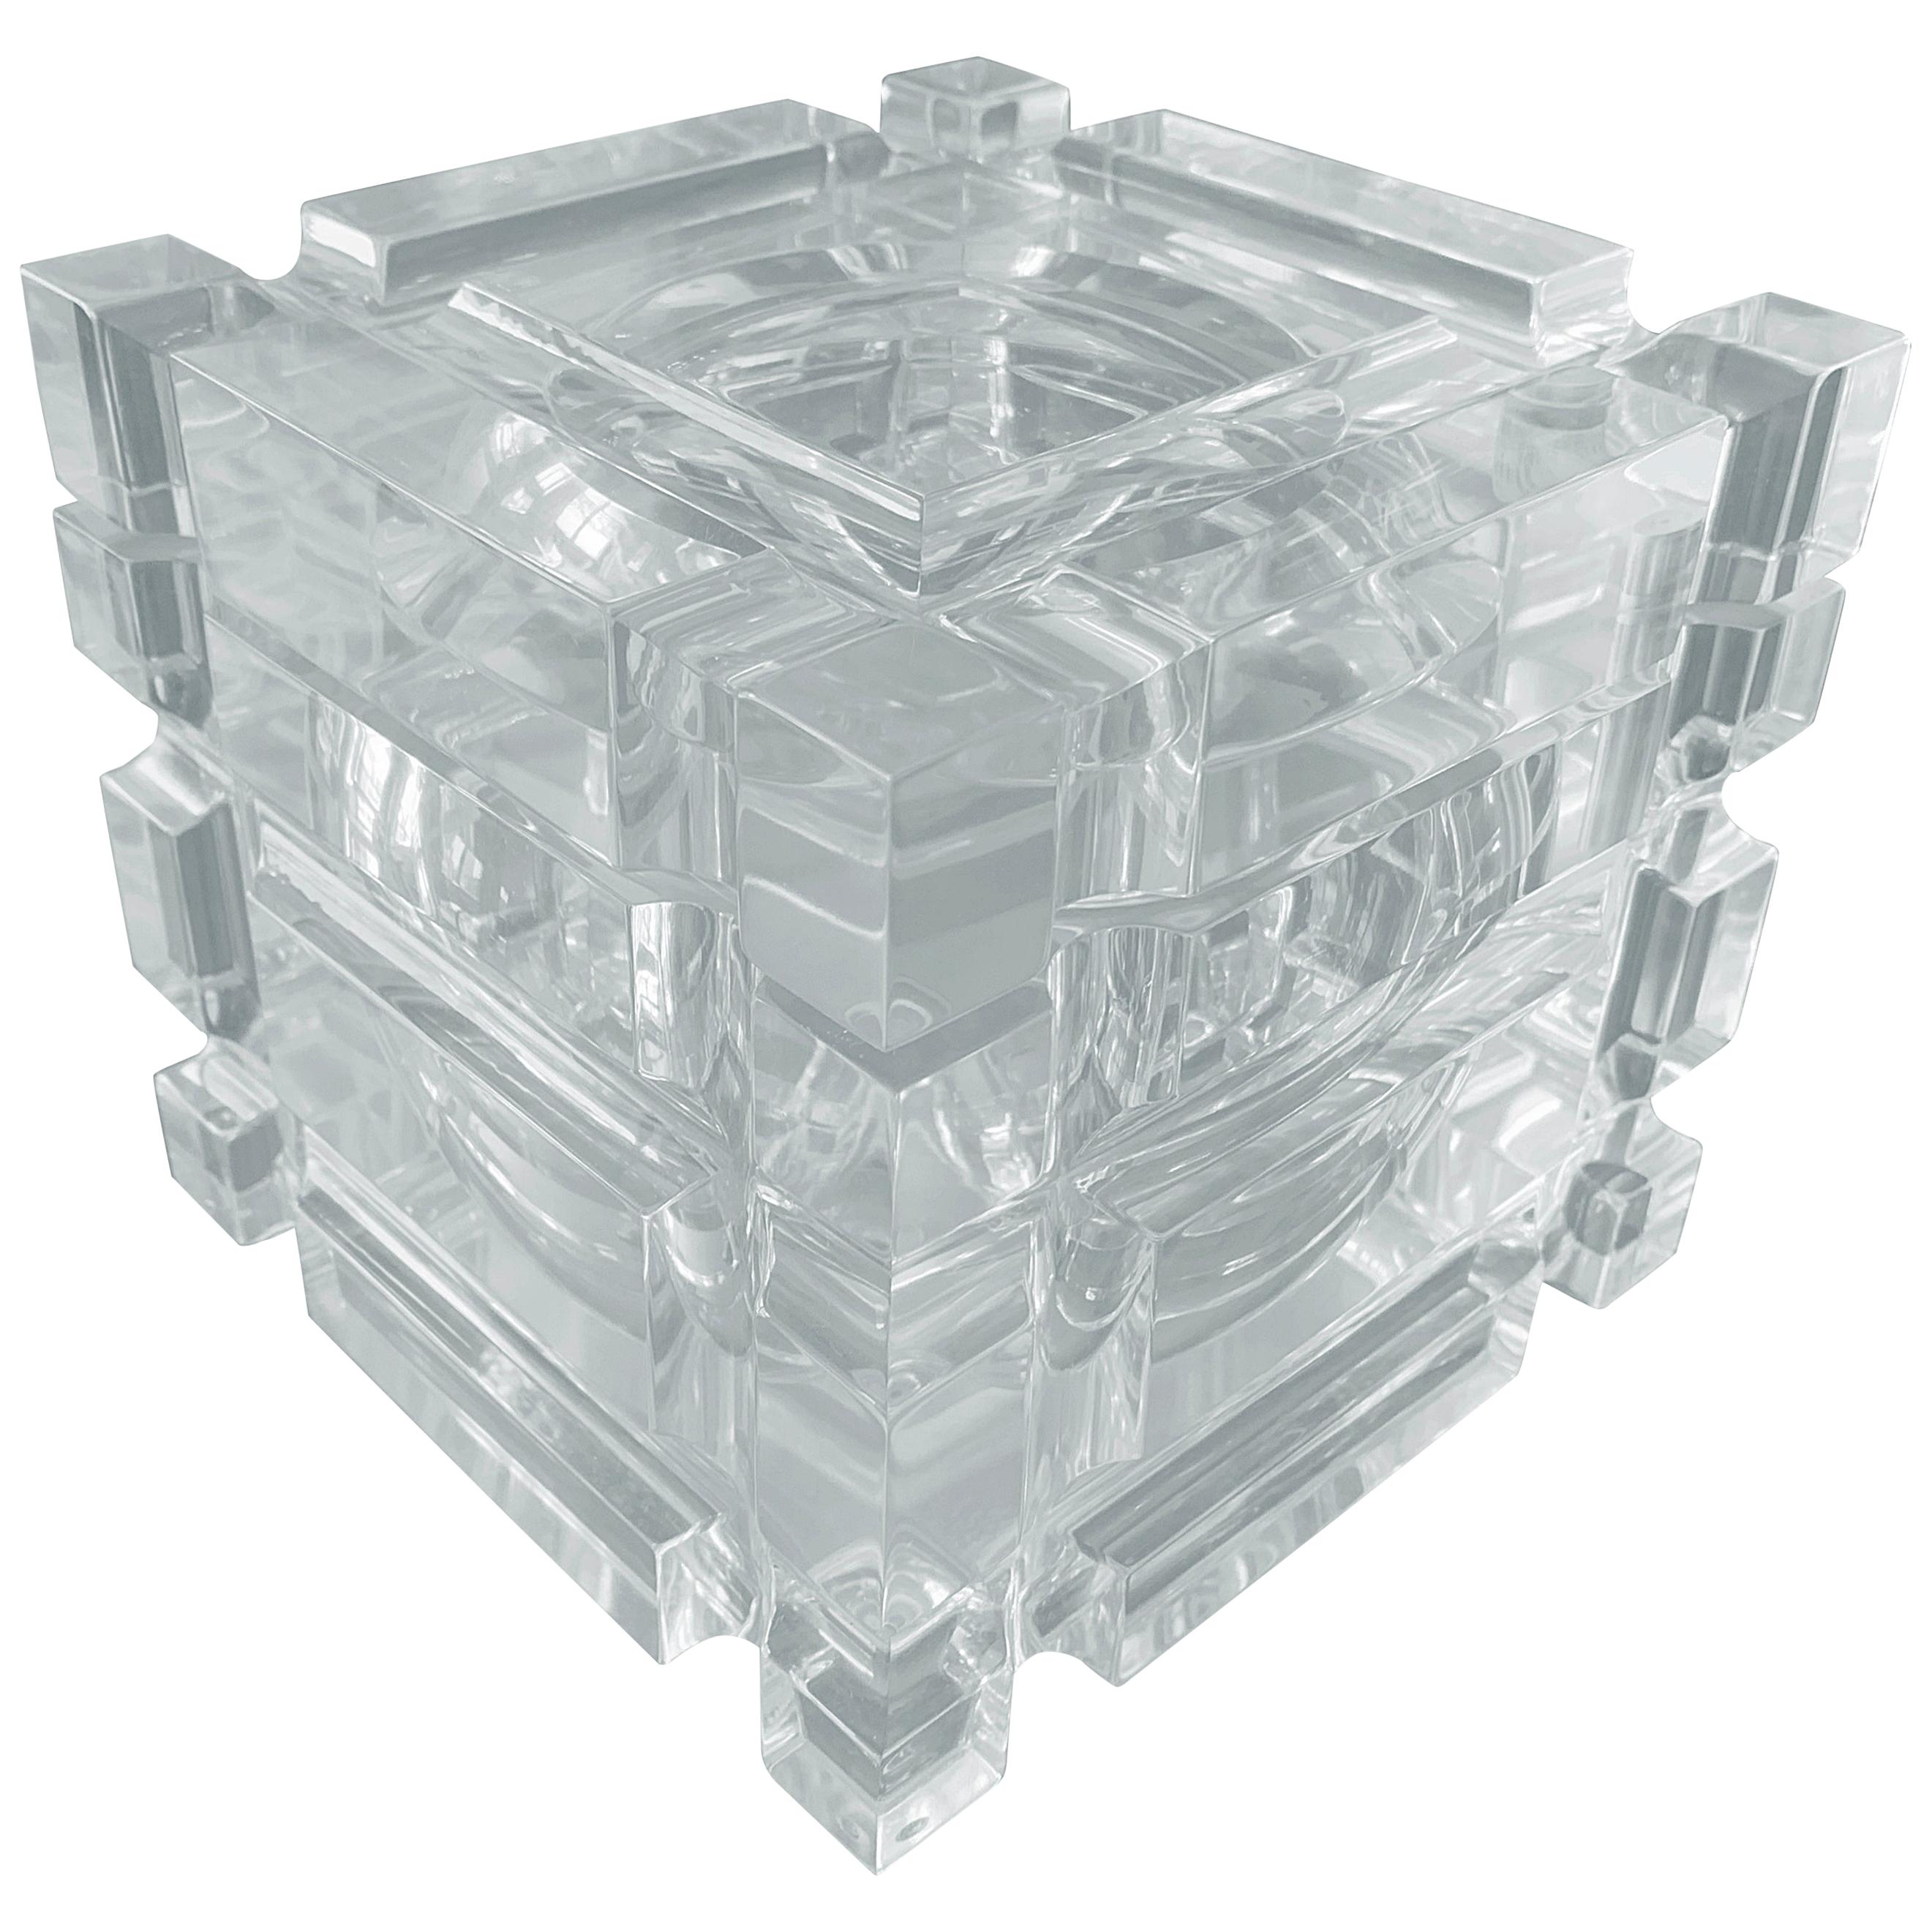 Stunning Geometric Style Ice Bucket in Lucite with a Swivel Lid